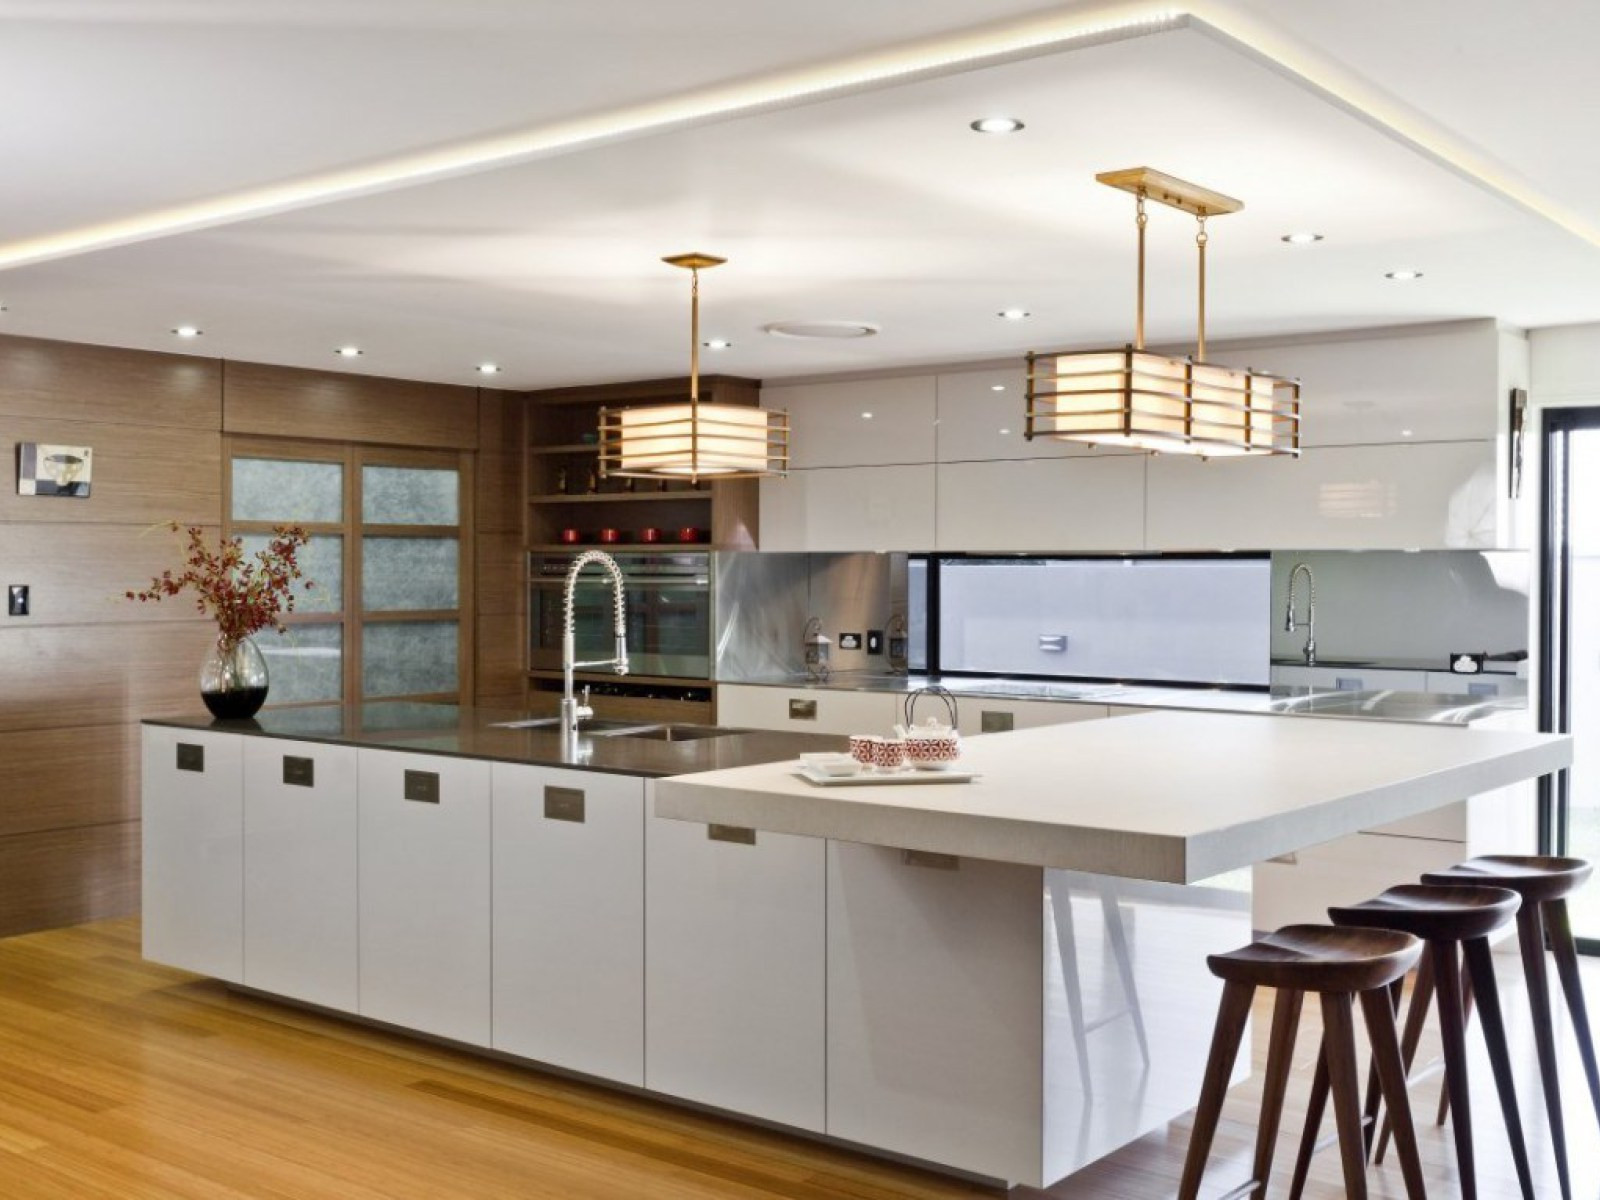 Kitchen Remodeling Cost
 Should You Always Look For The Cheapest Kitchen Remodeling